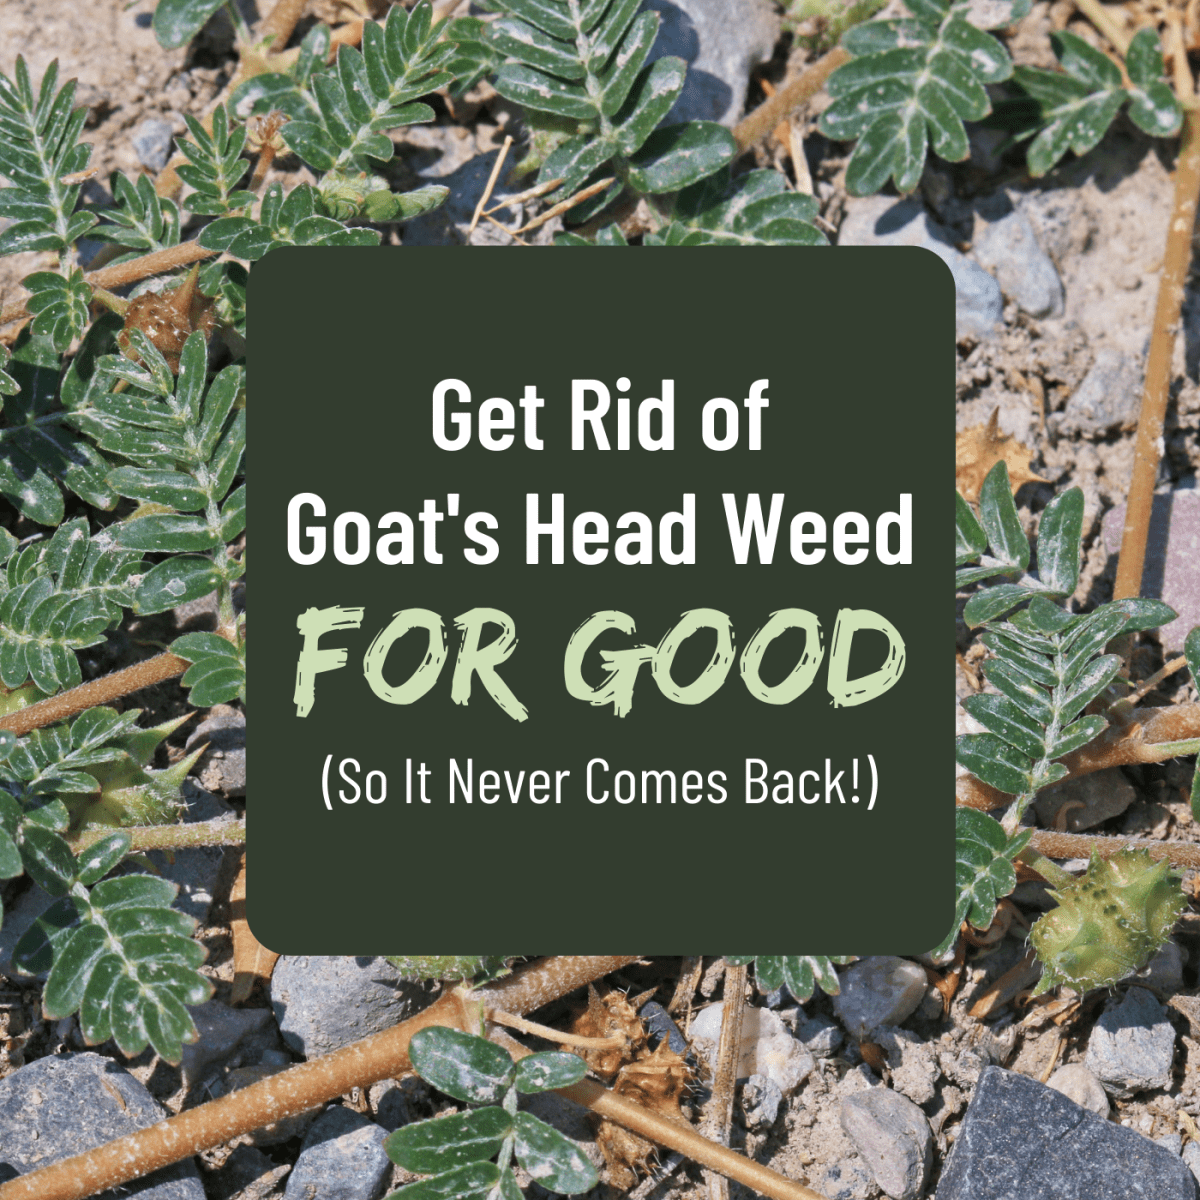 How To Get Rid Of Goat S Head Weeds, Will Roundup Kill Sticker Bushes